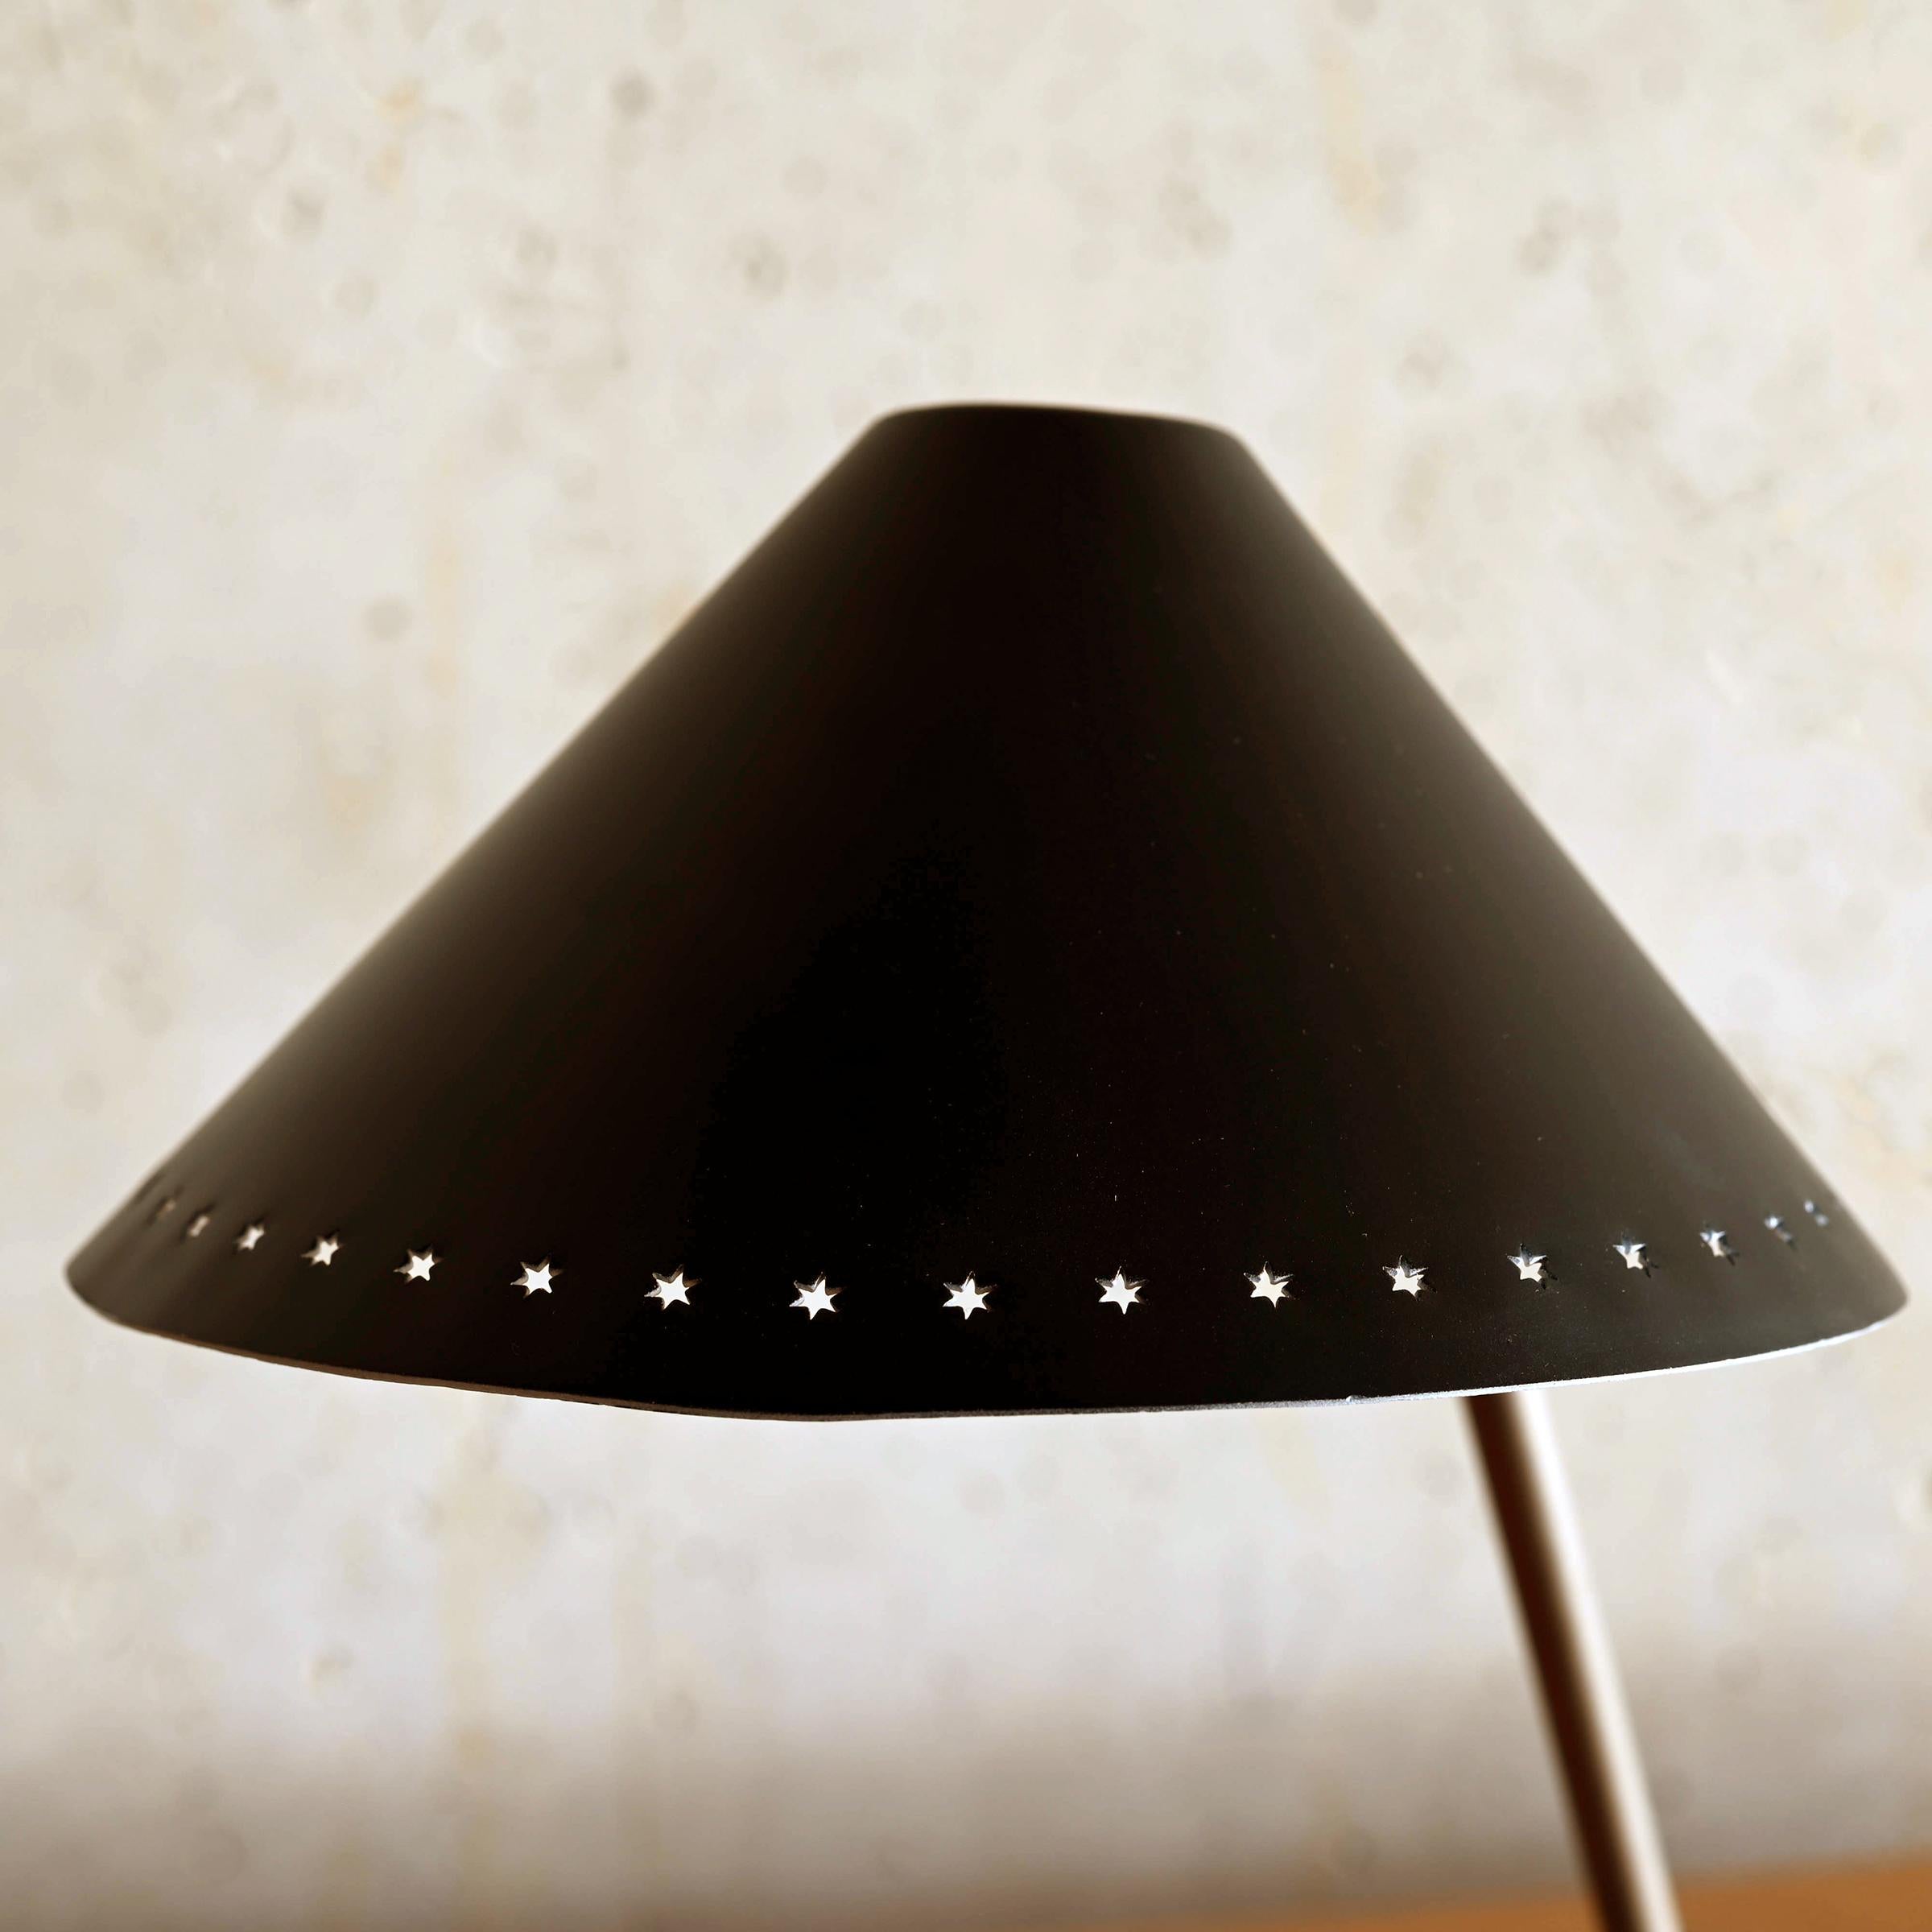 Pinocchio Lamp with black shade by H. Busquet for Hala Zeist, Netherlands For Sale 2